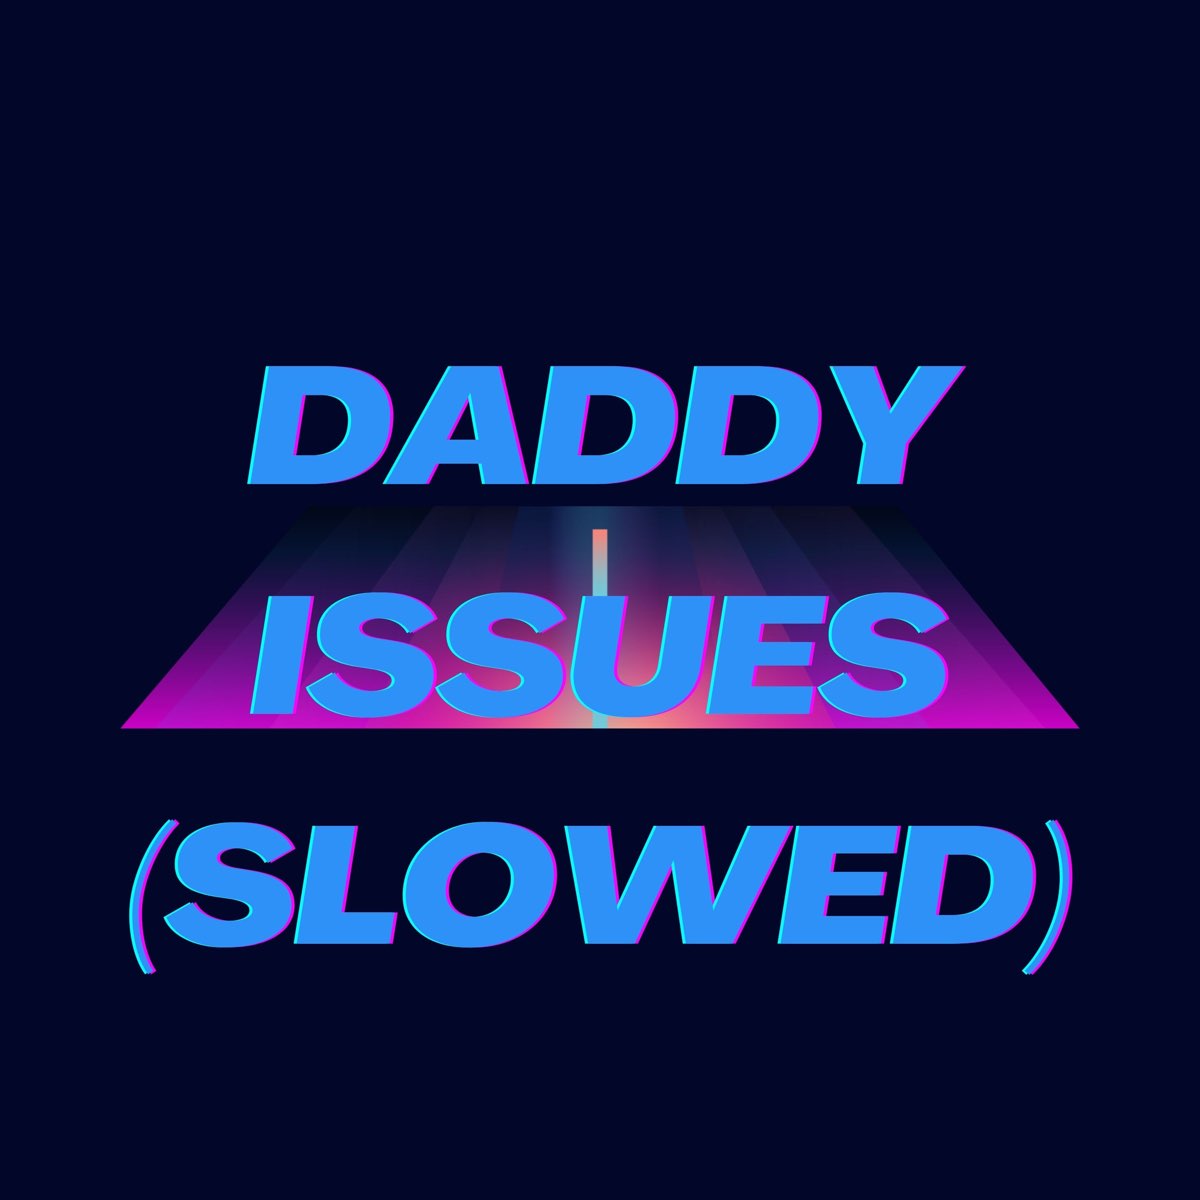 Daddy Issues. Eduardo XD. Daddy Issues Remix. Issues Slowed maitchh. Issues remix